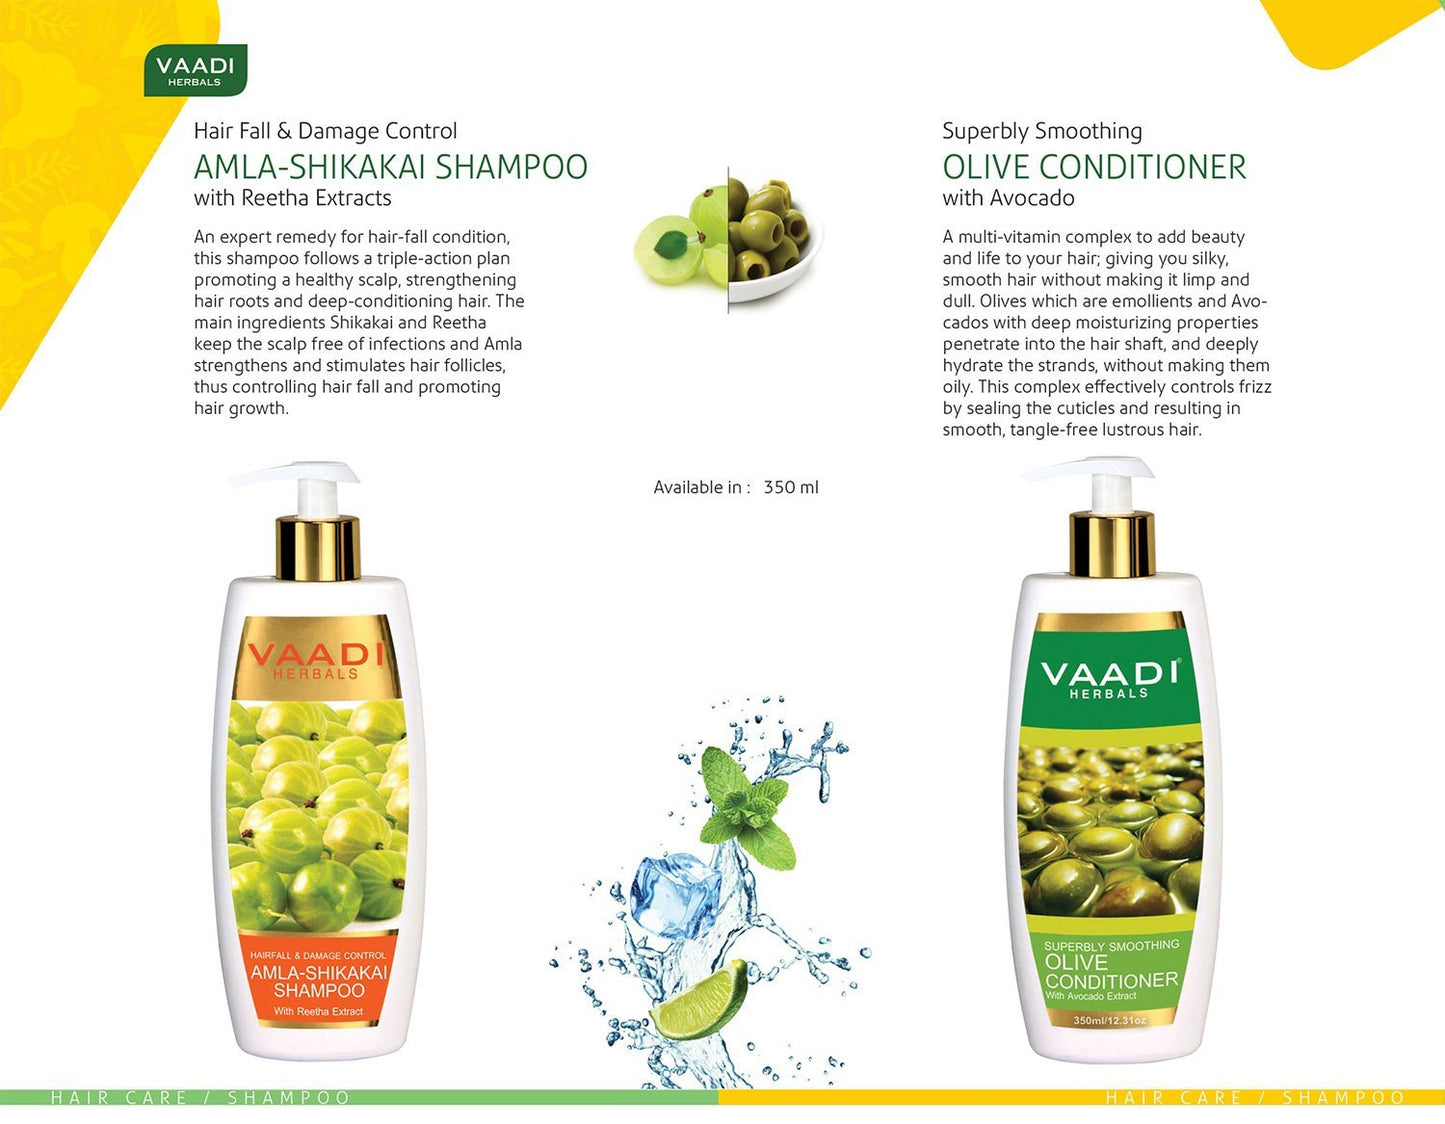 Hairfall & Damage Control Organic Shampoo (Indian Gooseberry Extract) Rich Olive Conditioner with Avocado Extract (2 x 350 ml/ 12 fl oz)